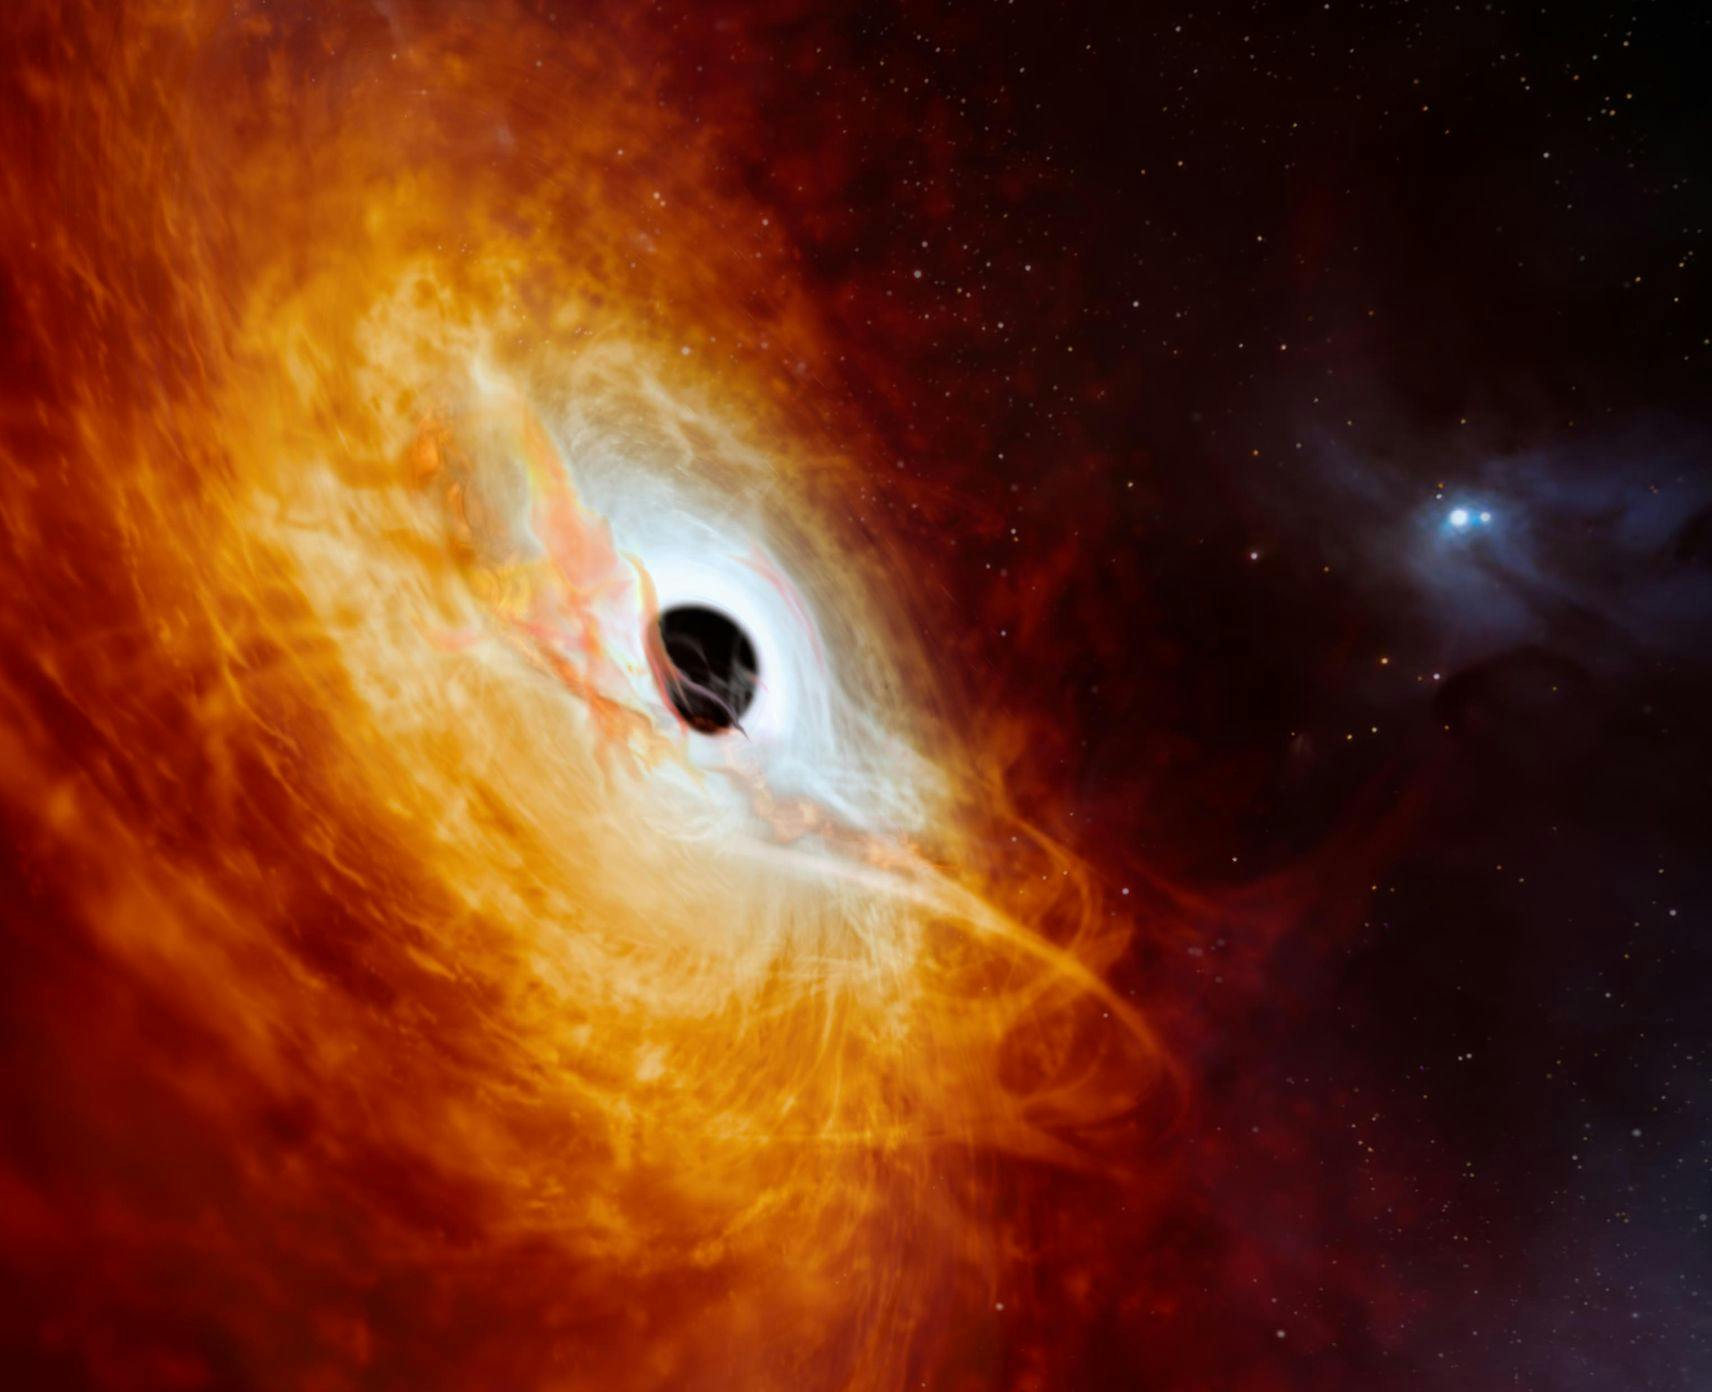 Monster black hole devouring one sun every day article image